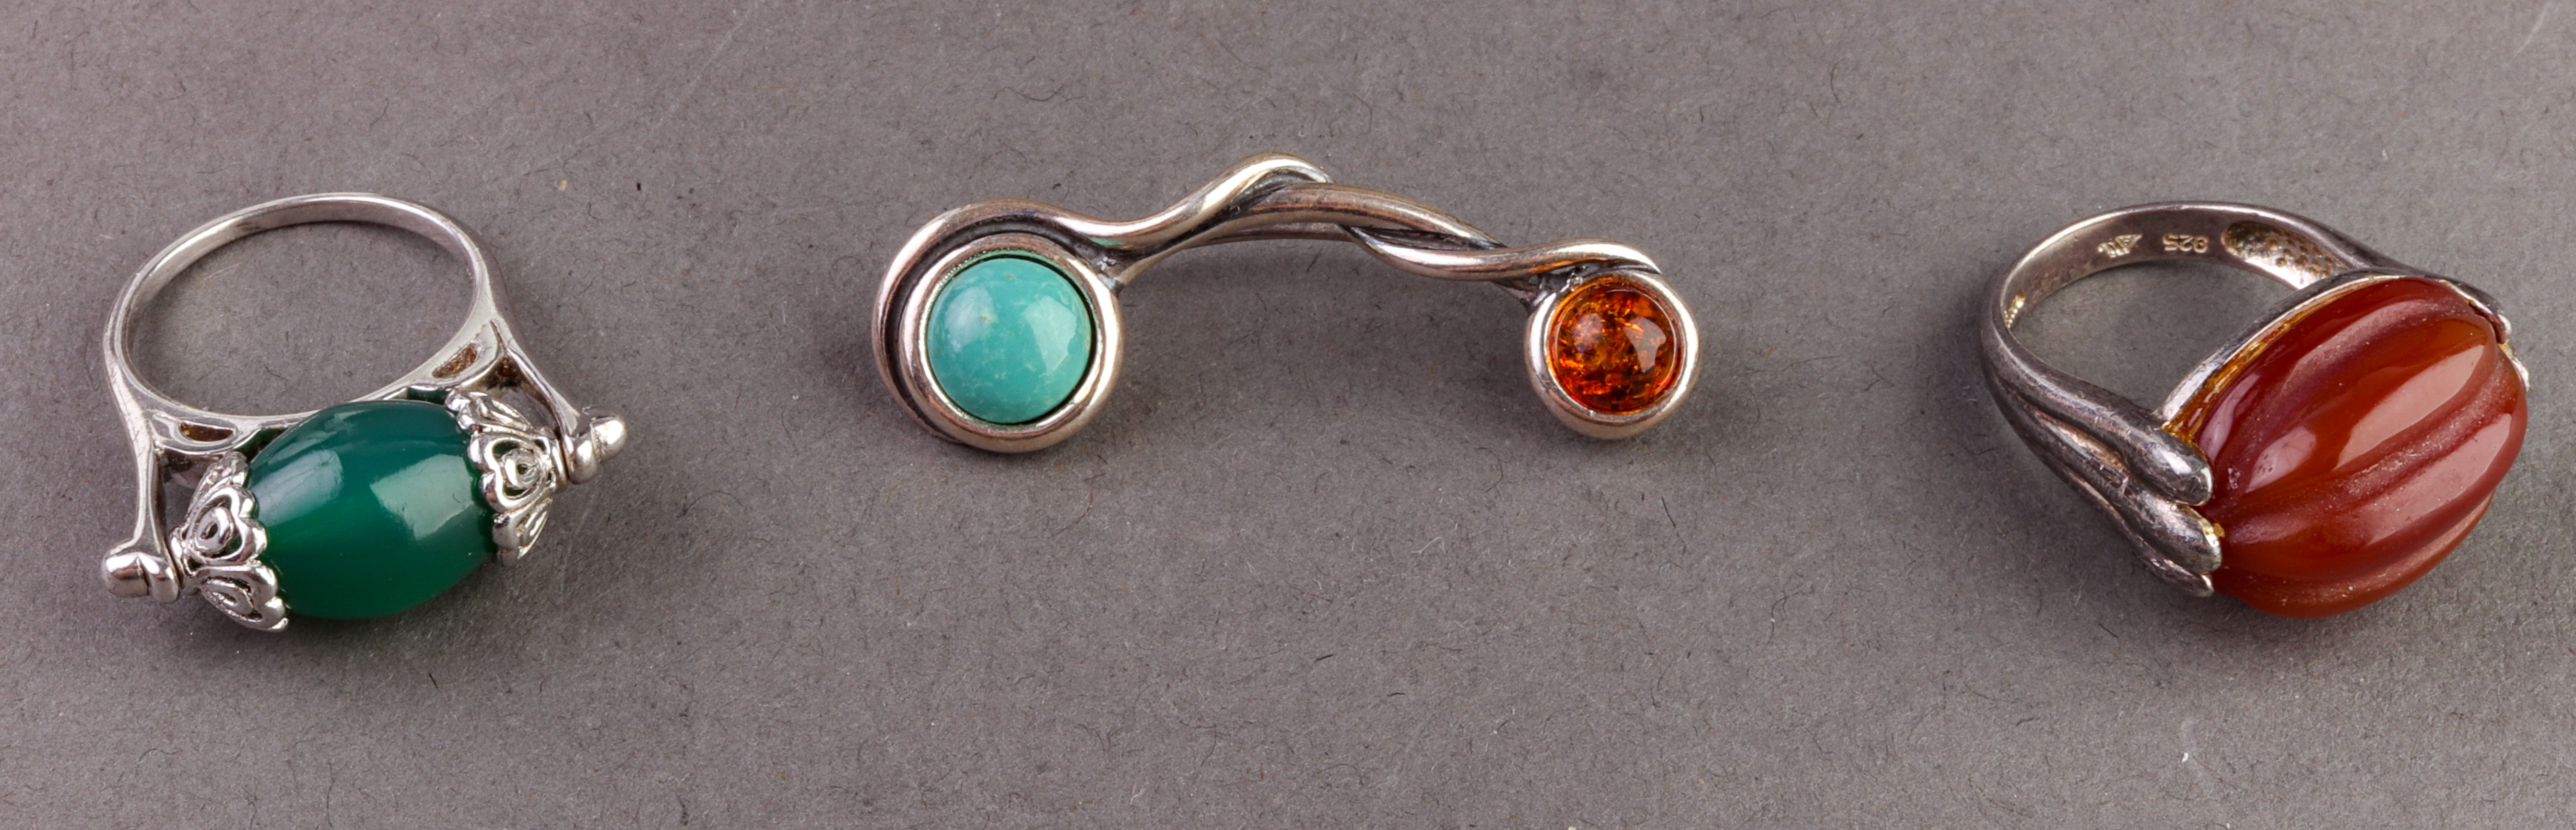 SILVER STONE AMBER RING PIN 363c8d